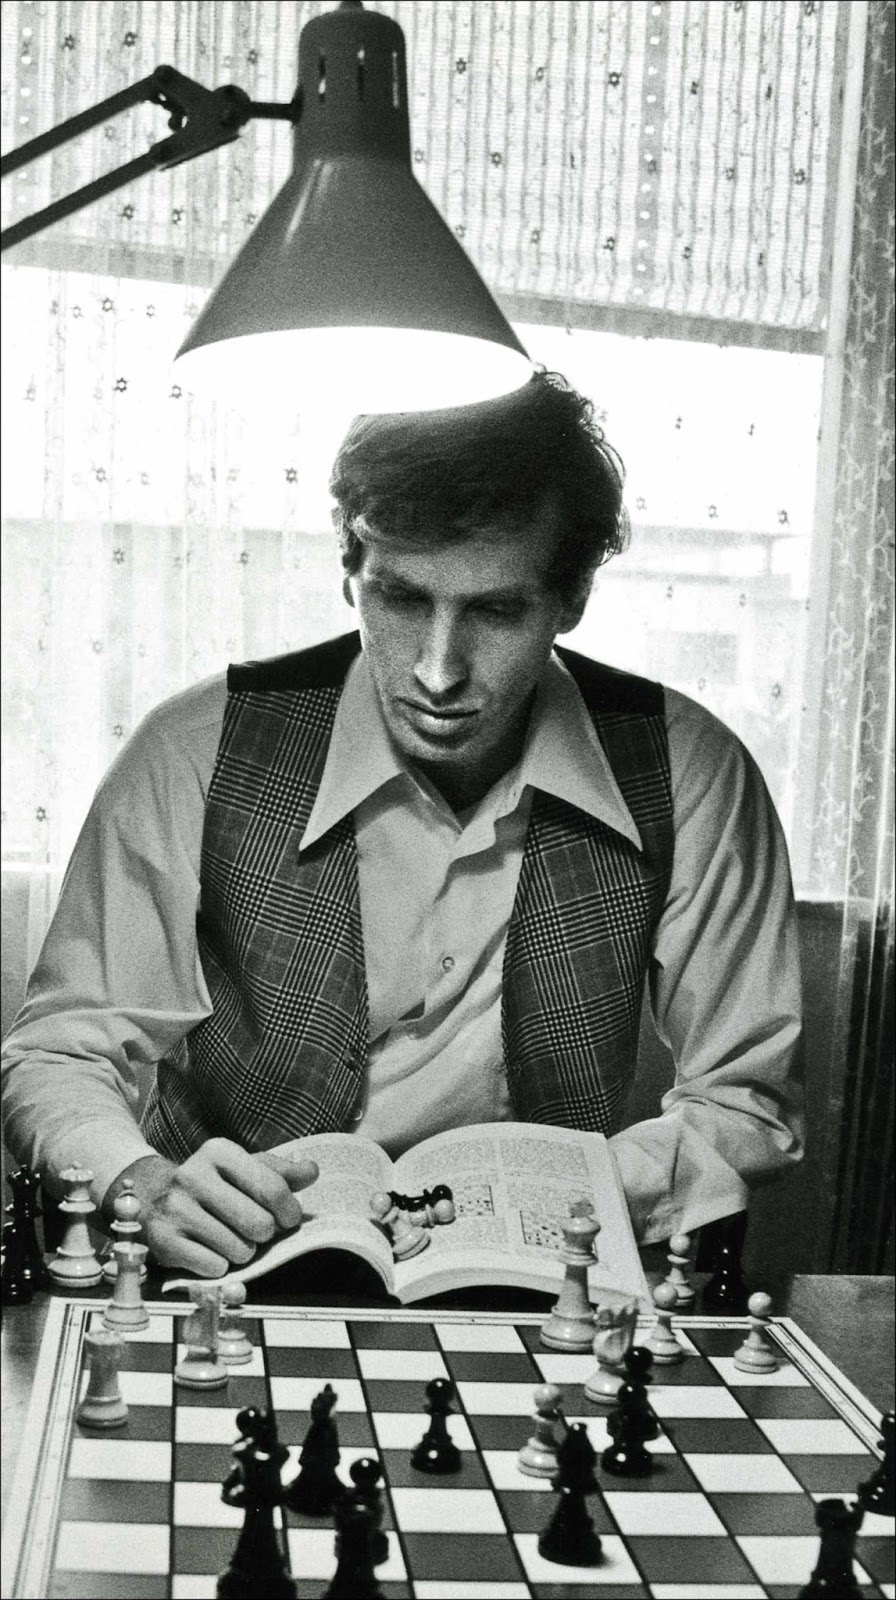 Chess Book Chats: Bobby Fischer and chess literature